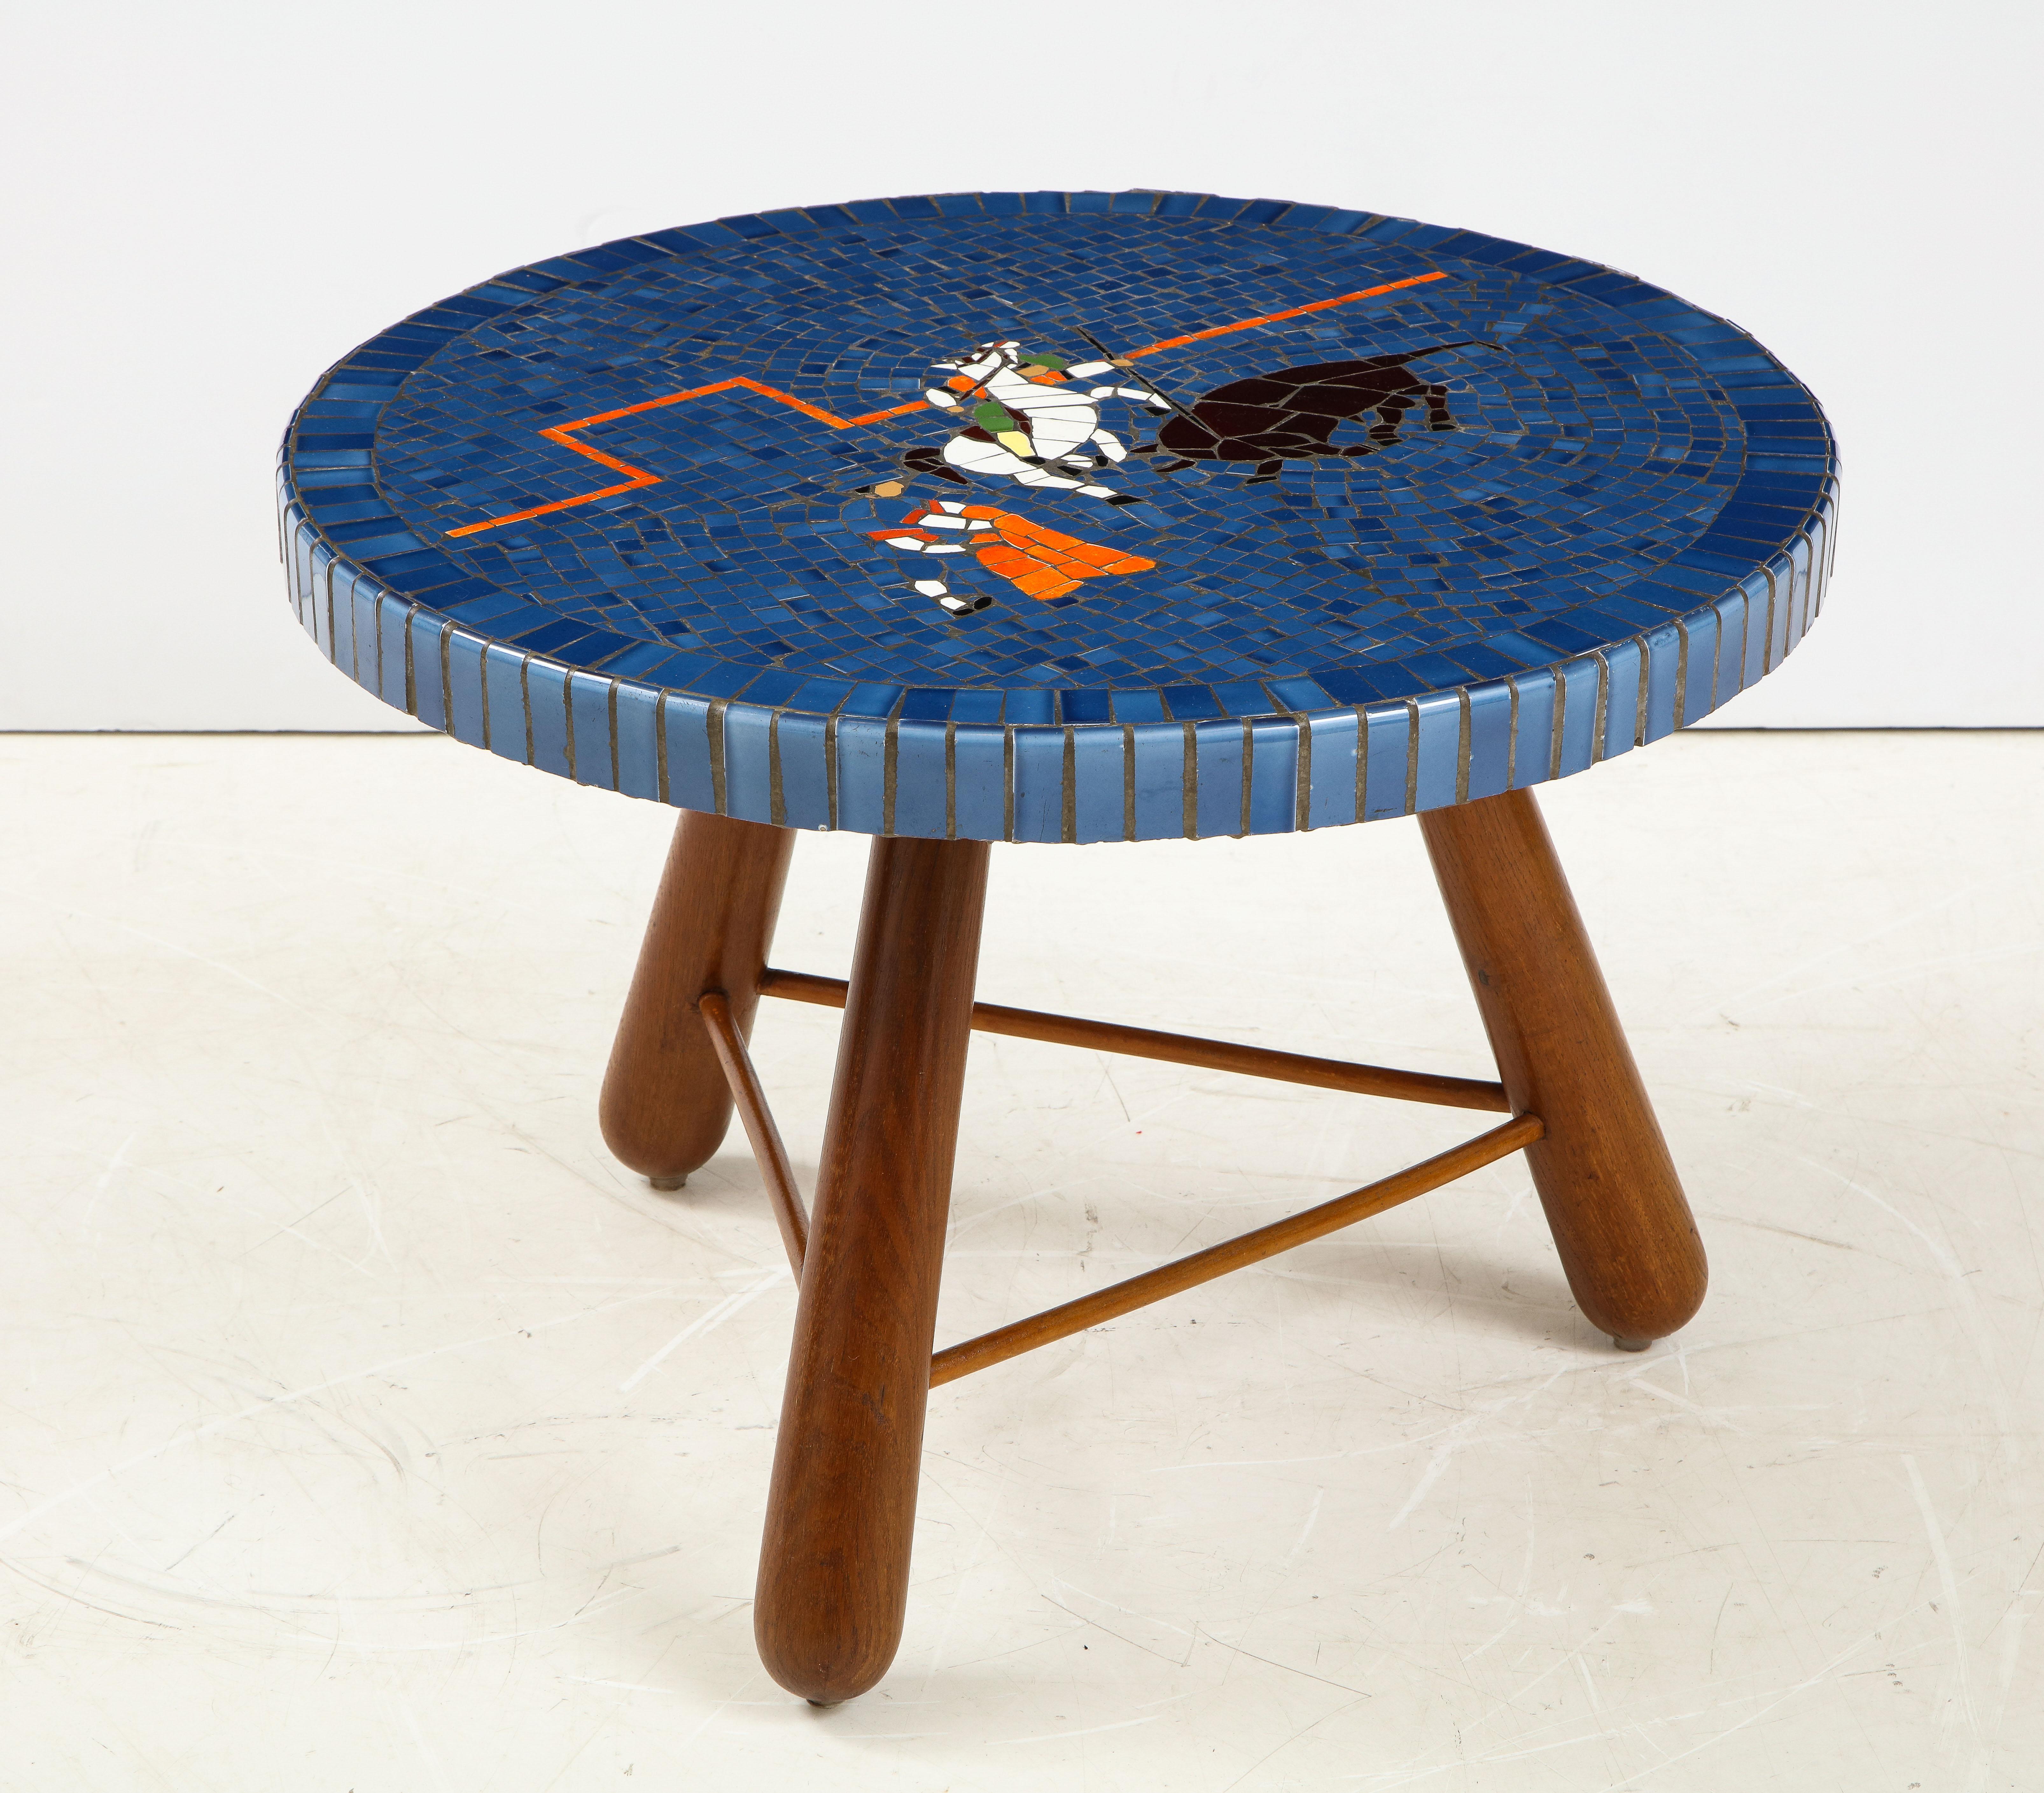 Stone Danish Tile Top and Oak Side Table, attributed to Otto Færge, Circa 1940-1950